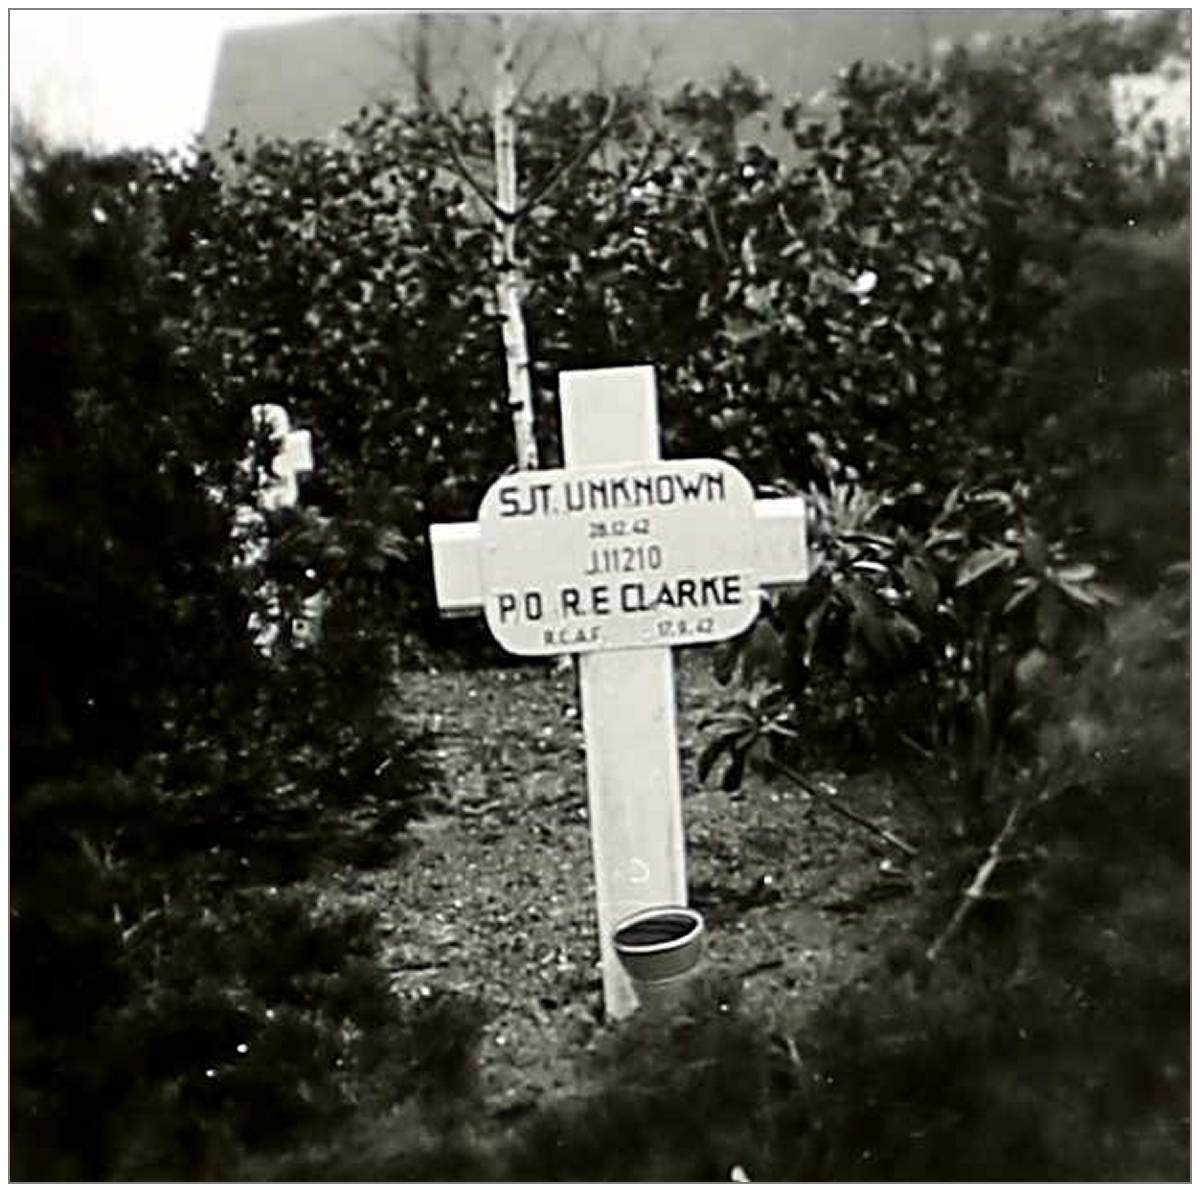 Gravemarker - Unknown Sgt and P/O. J/11210 - Robert Edward Clark(e) - RCAF